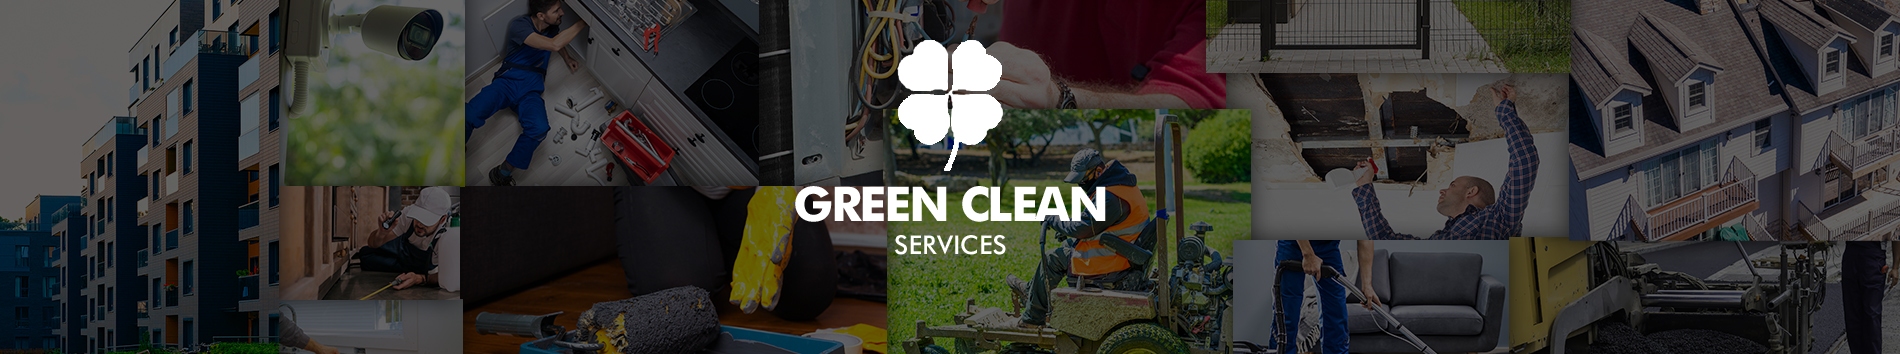 Green Clean Services